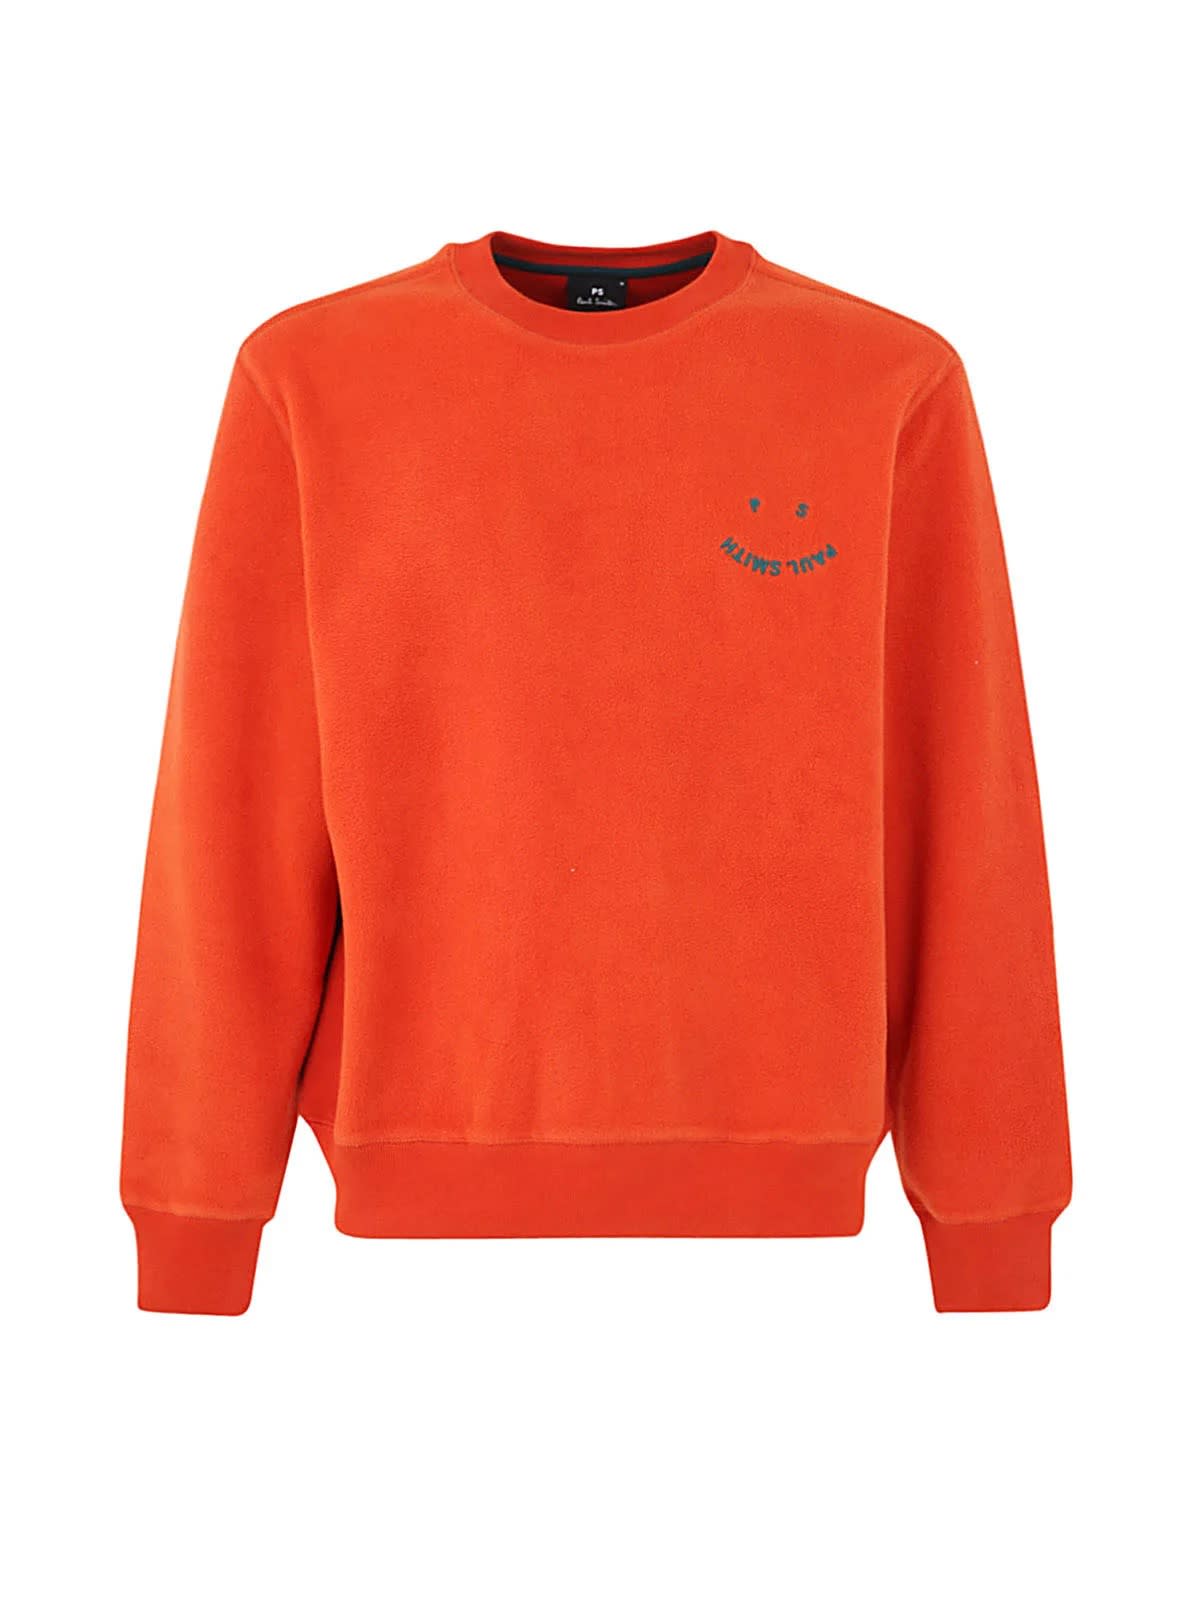 Paul Smith Happy Embroidered Sweater